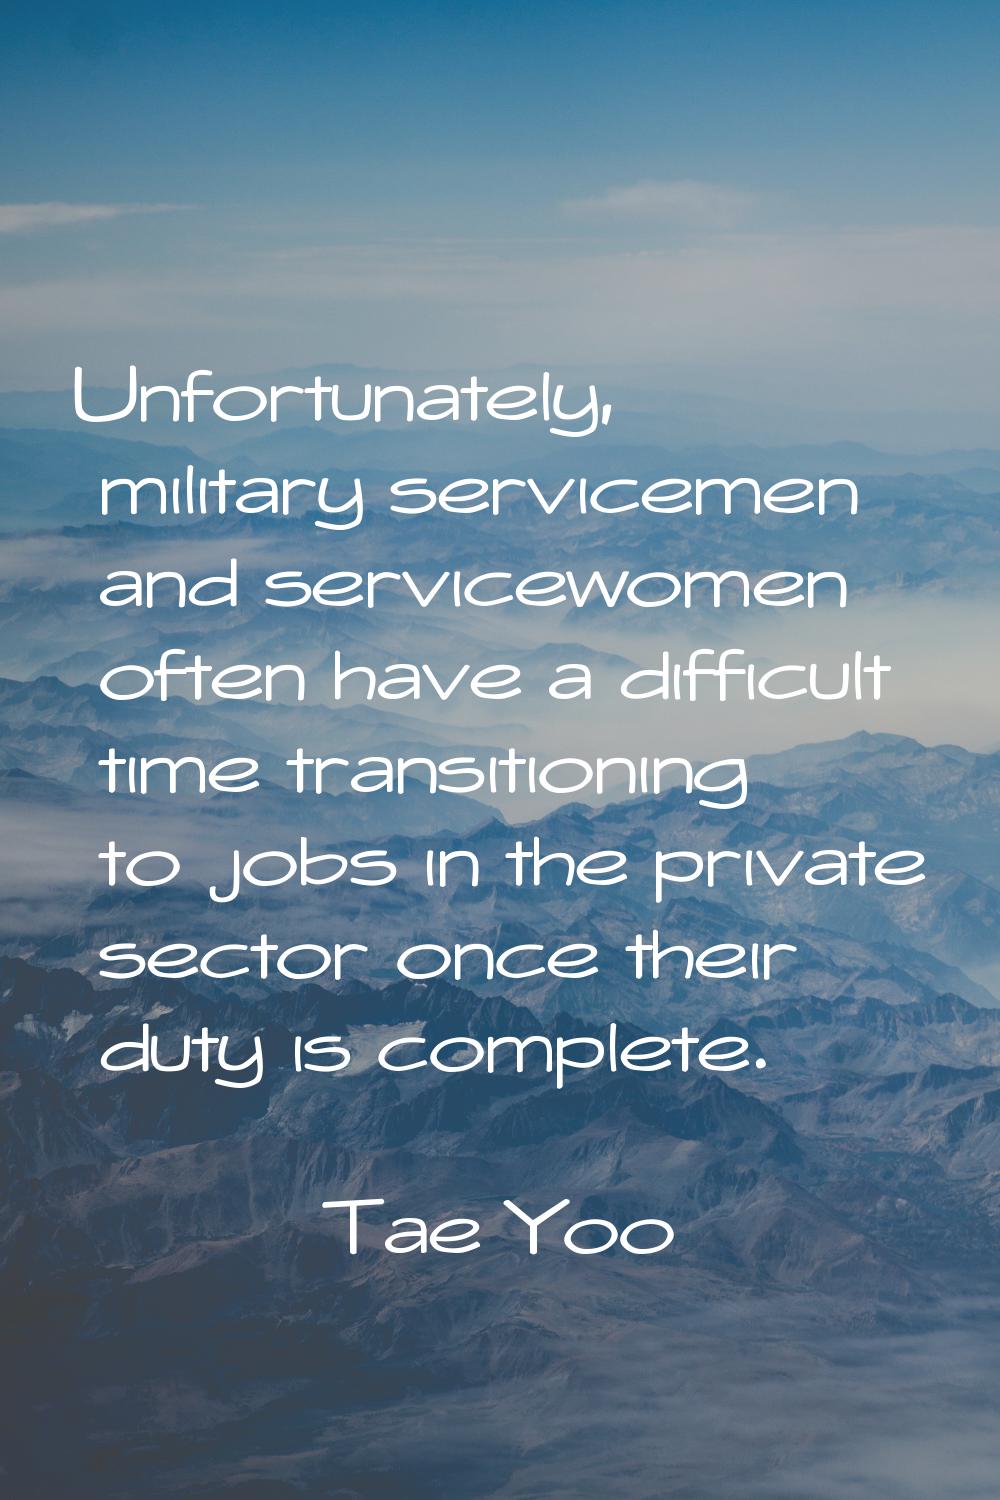 Unfortunately, military servicemen and servicewomen often have a difficult time transitioning to jo